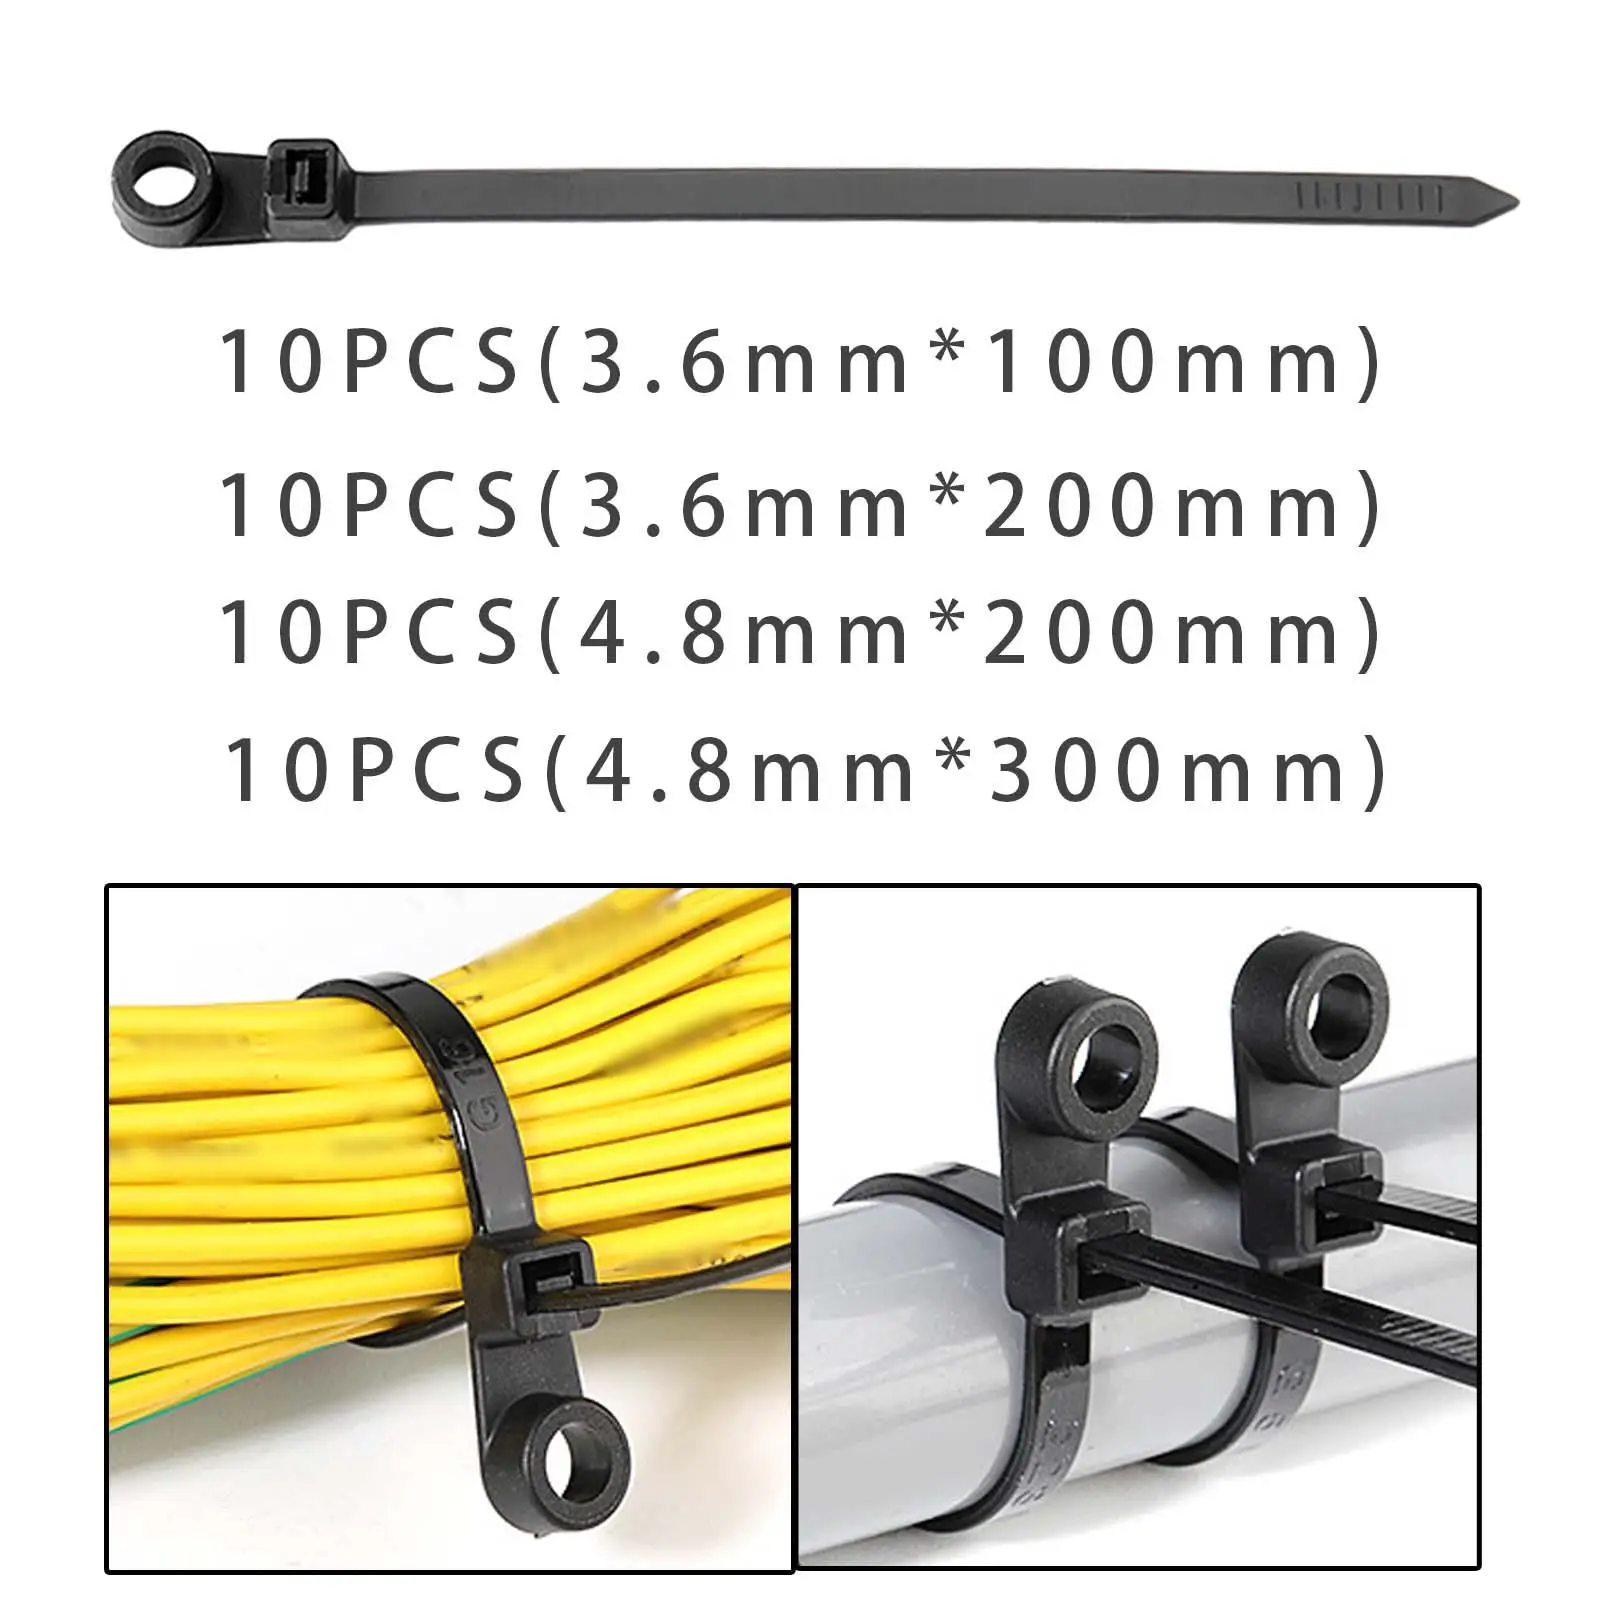 10x Cable Zips Wire Tie Wraps Bundle Strap with Screw Hole Mount for Office Cable and Wire Assembly Garage Garden Home